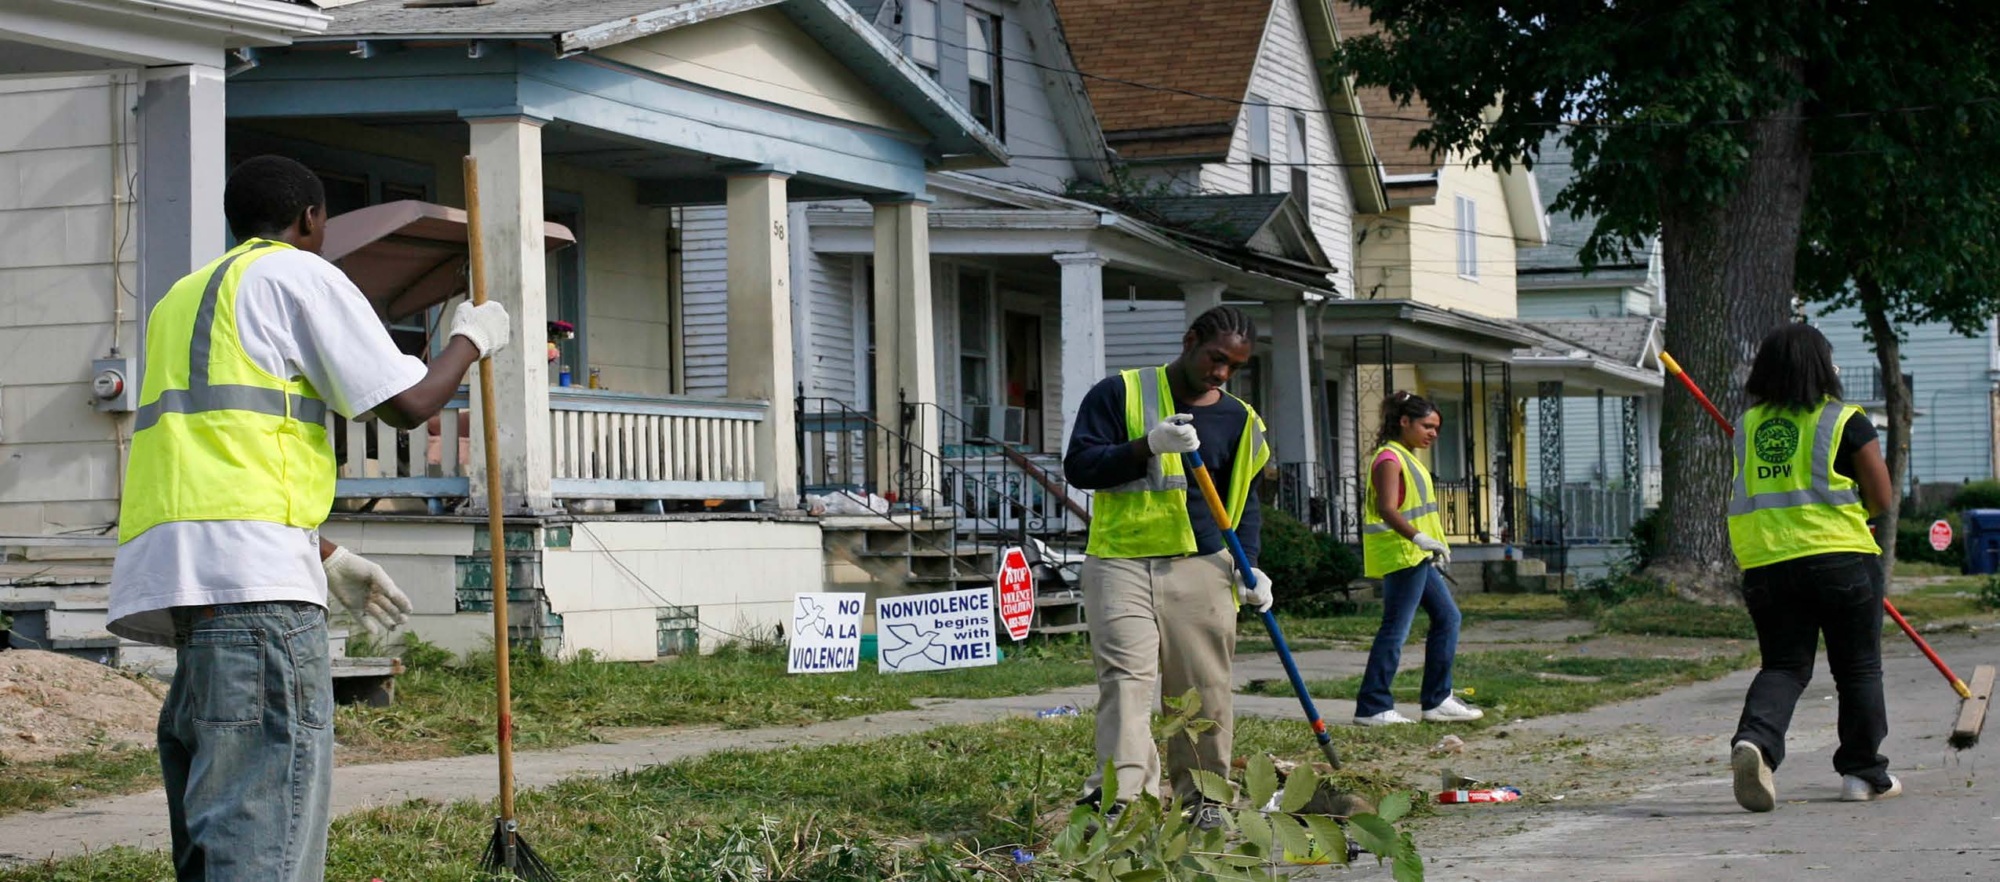 workers cleaning up a neighborhood